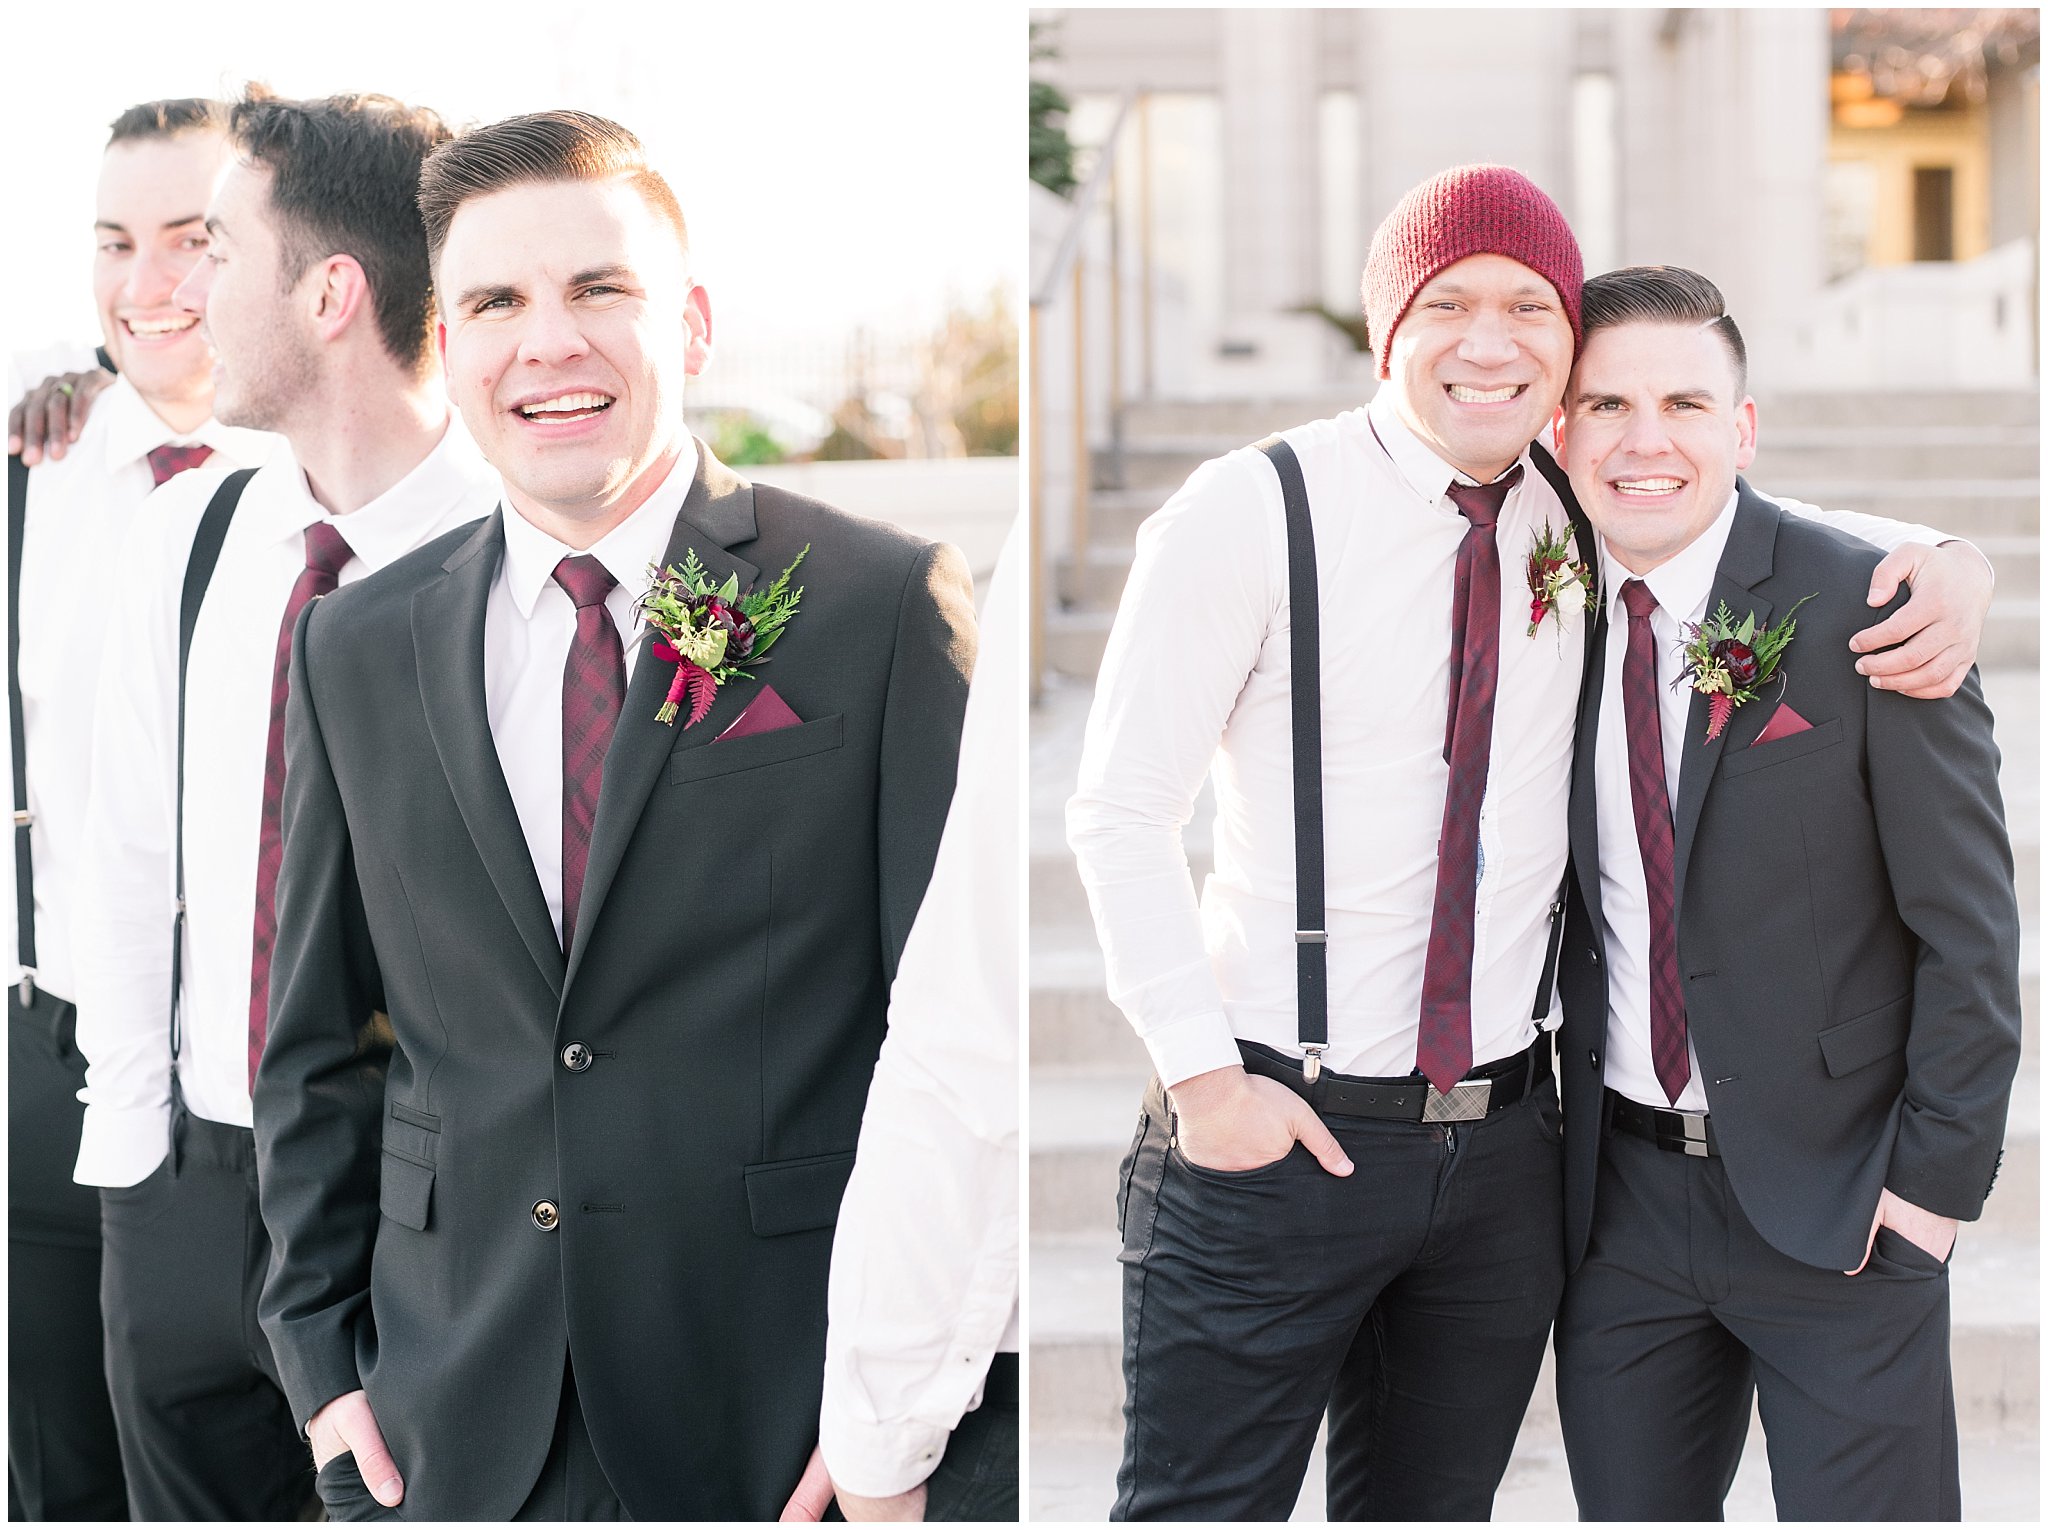 Groomsmen portraits in burgundy and black at the Oquirrh Mountain Temple | Oquirrh Mountain Temple and Gardner Village Wedding | The Gathering Place | Jessie and Dallin Photography